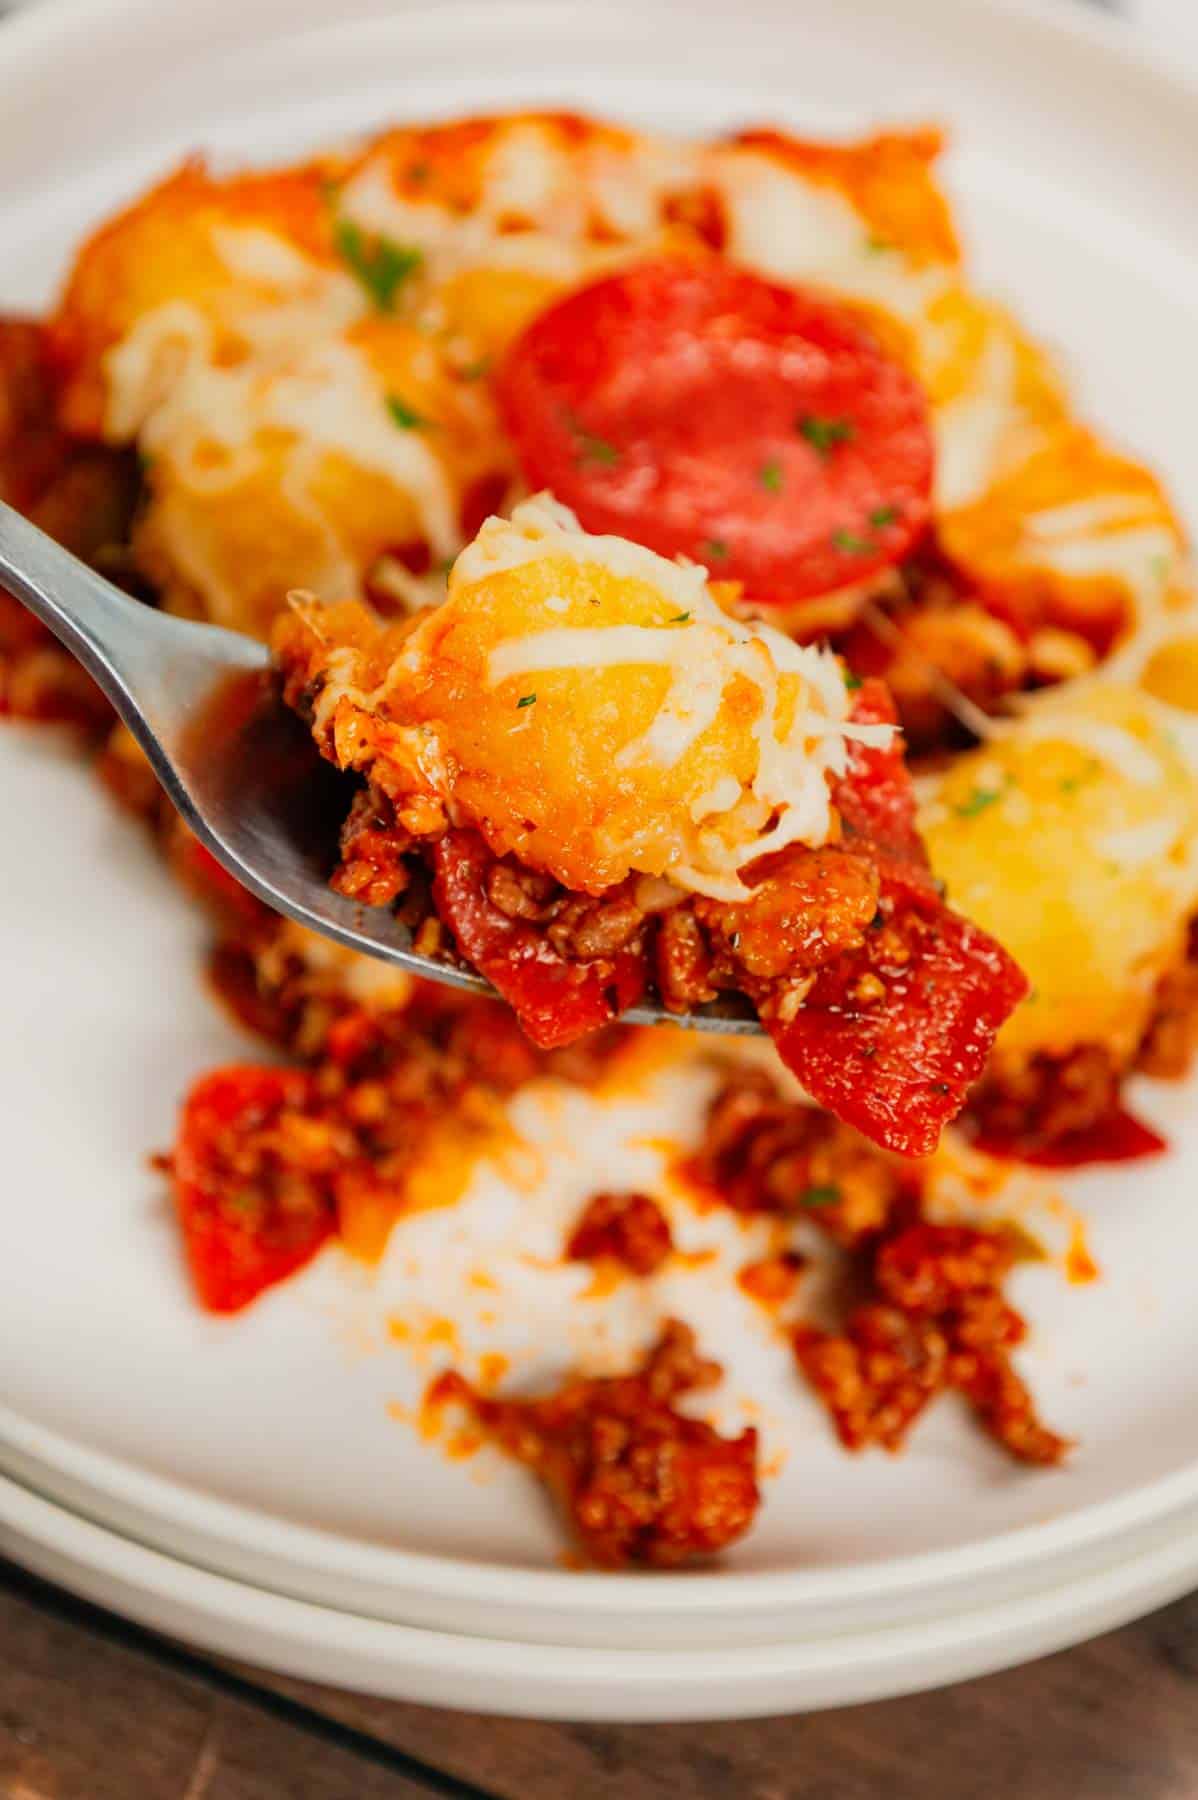 Pizza Tater Tot Casserole is a hearty casserole loaded with ground beef, Italian sausage, pepperoni, green peppers, onions, pizza sauce, mozzarella cheese and crispy tater tots.